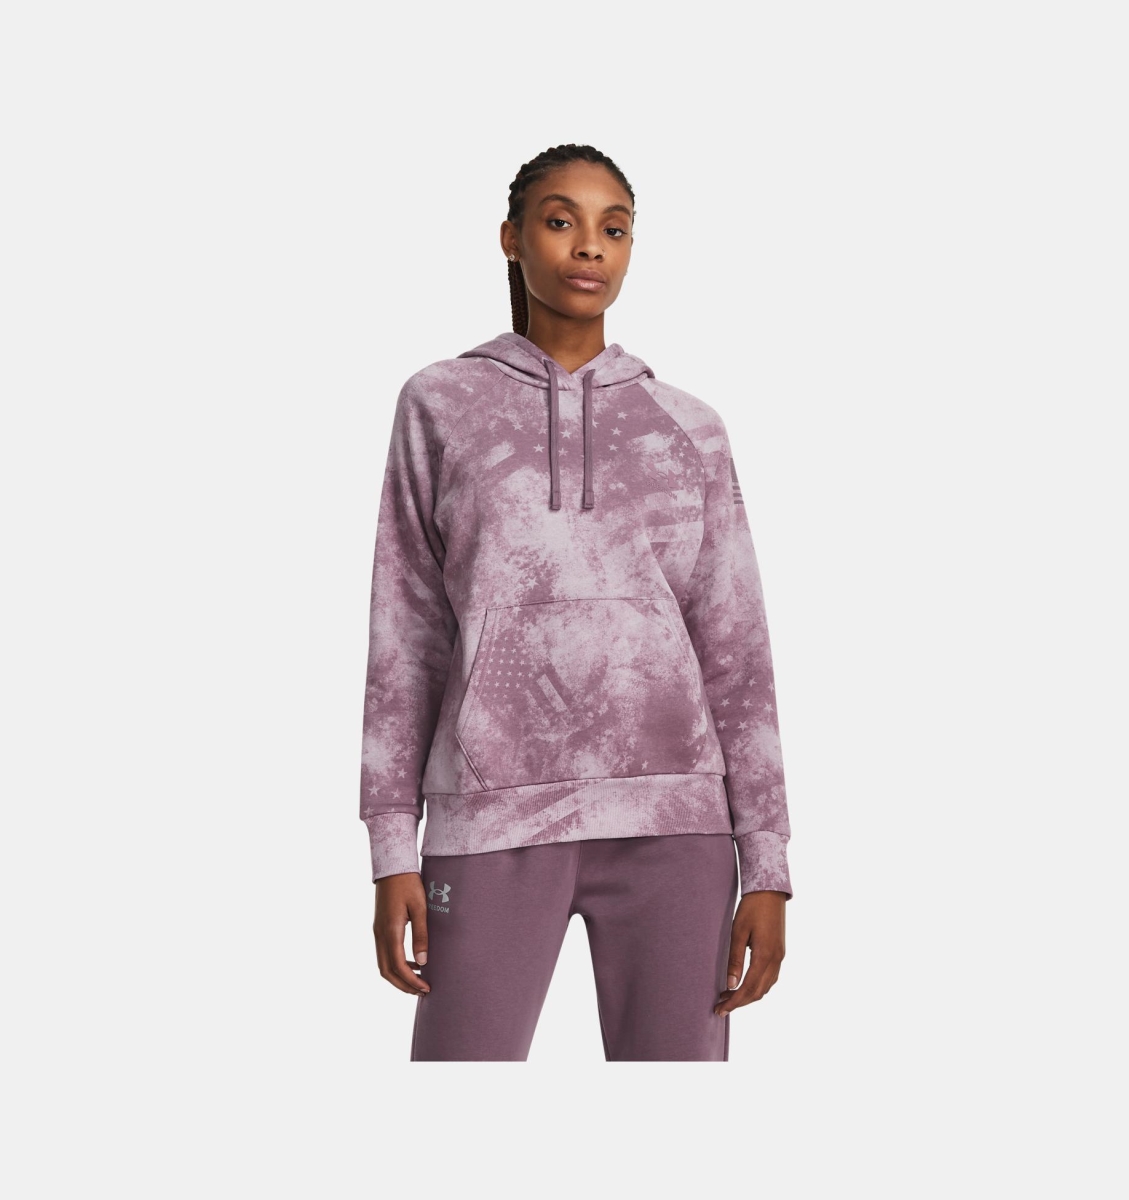 Under Armour 1379625500SM Women Freedom Rival Amp Hoodie, Misty Purple - Small -  Inner Armour